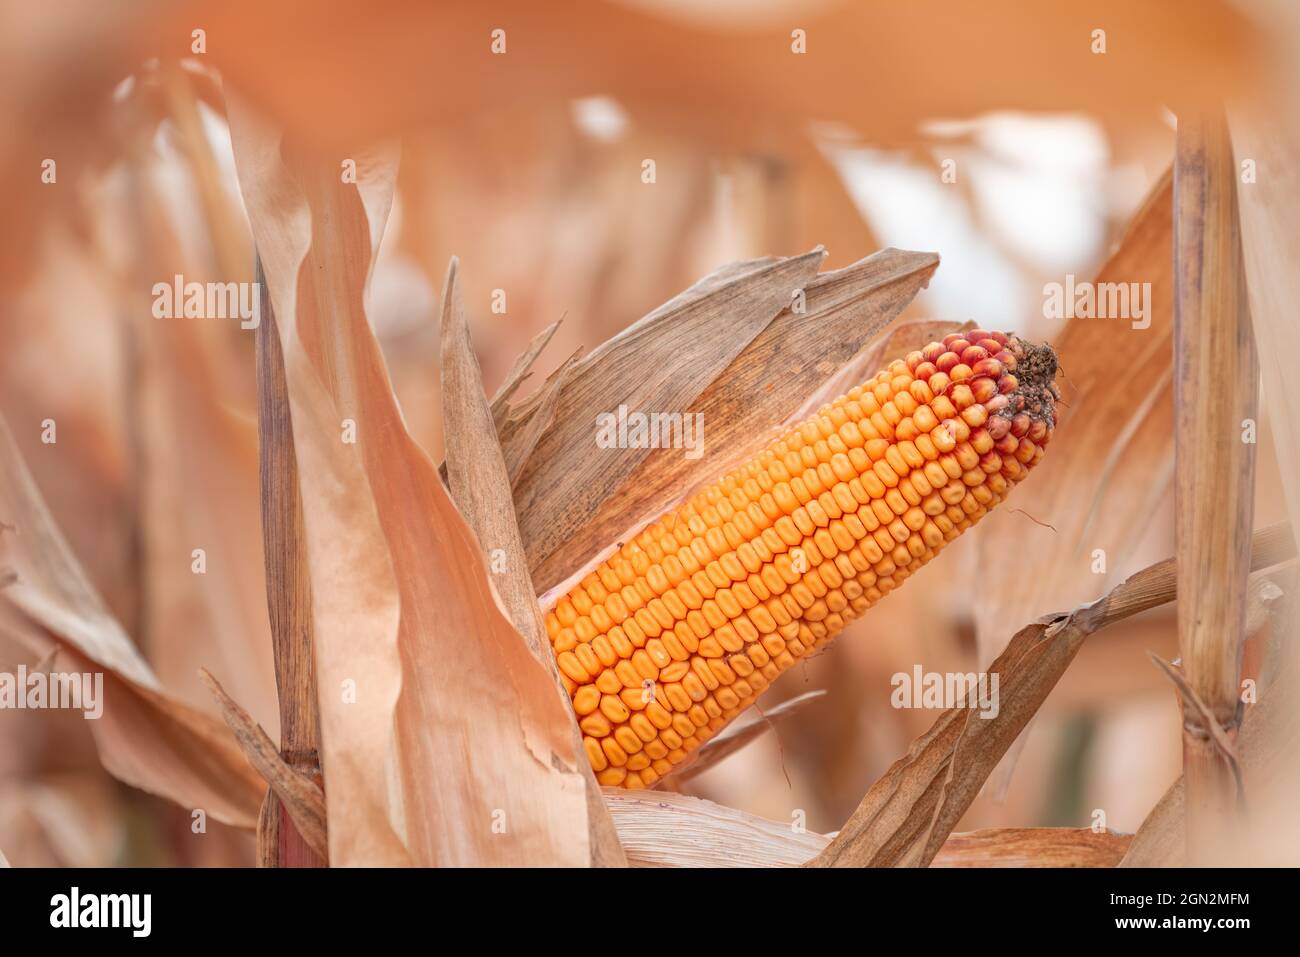 Close up of corn ear in maize crops field, selective focus Stock Photo